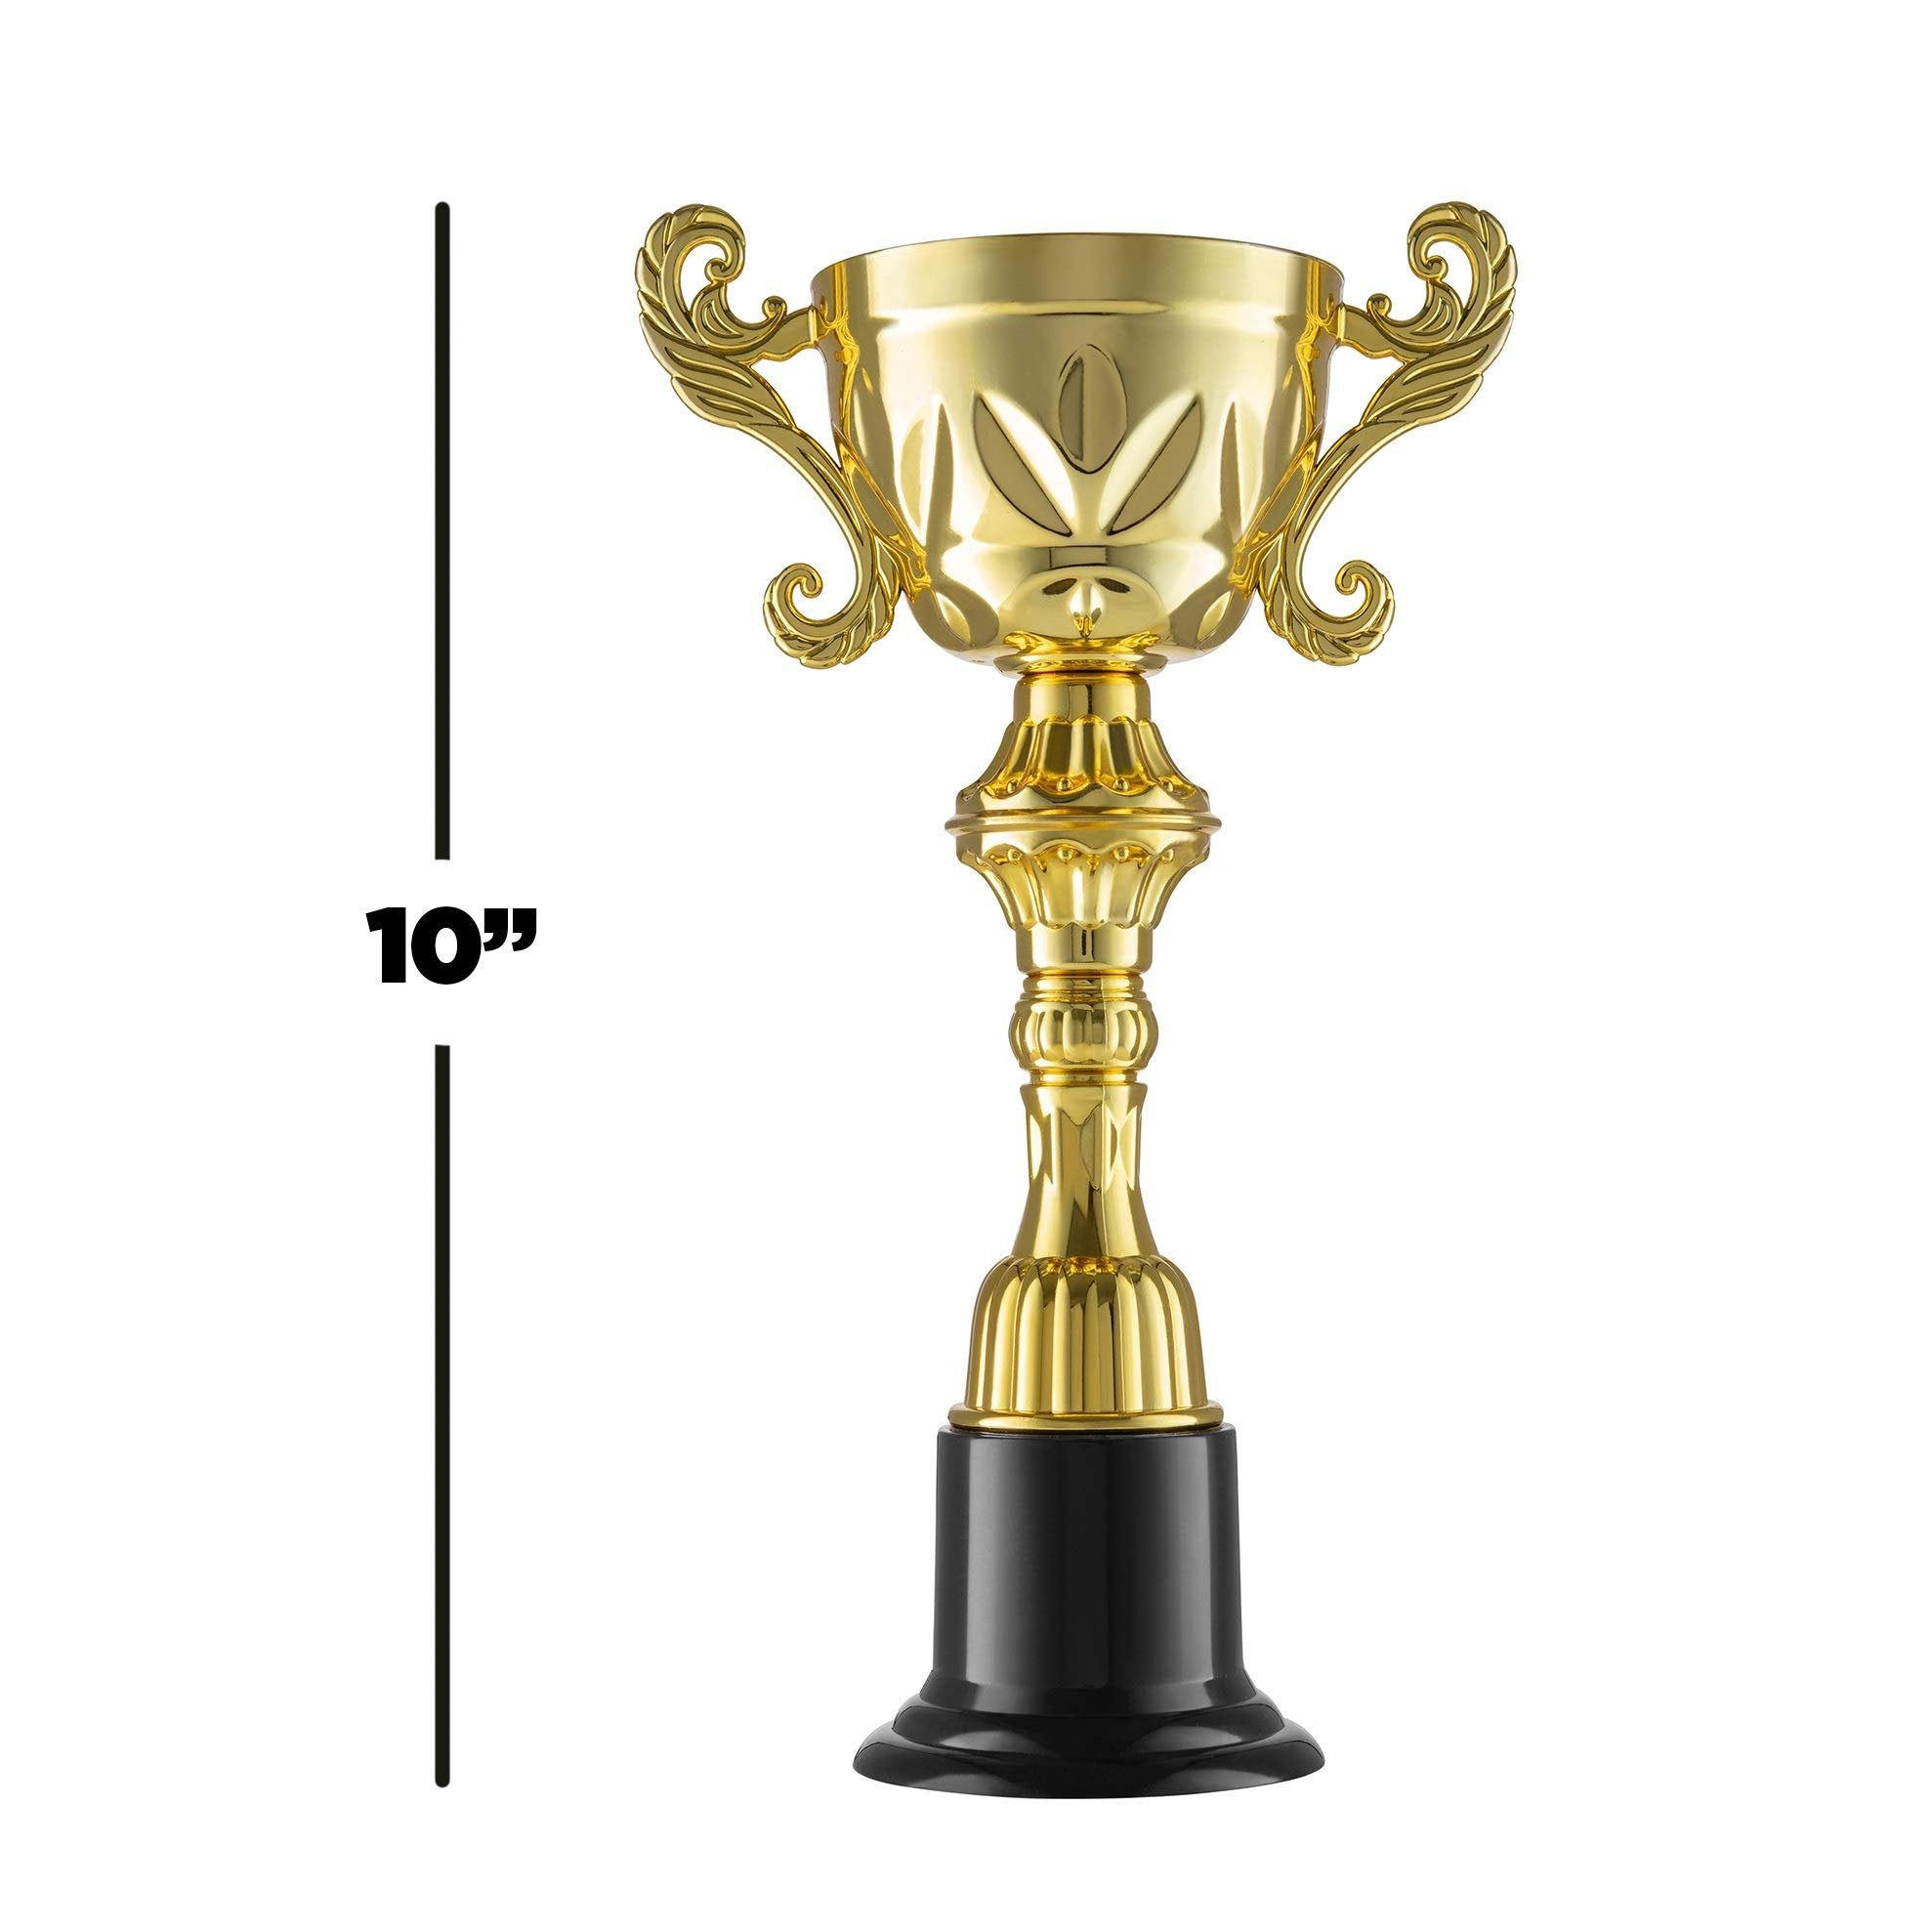 PREXTEX Movie Trophy Award - Awards and Trophies for Party Celebrations, Award Ceremonies, and Appreciation Gifts - Ideal for Competitions, Rewards, and Party Favors for Kids & Adults